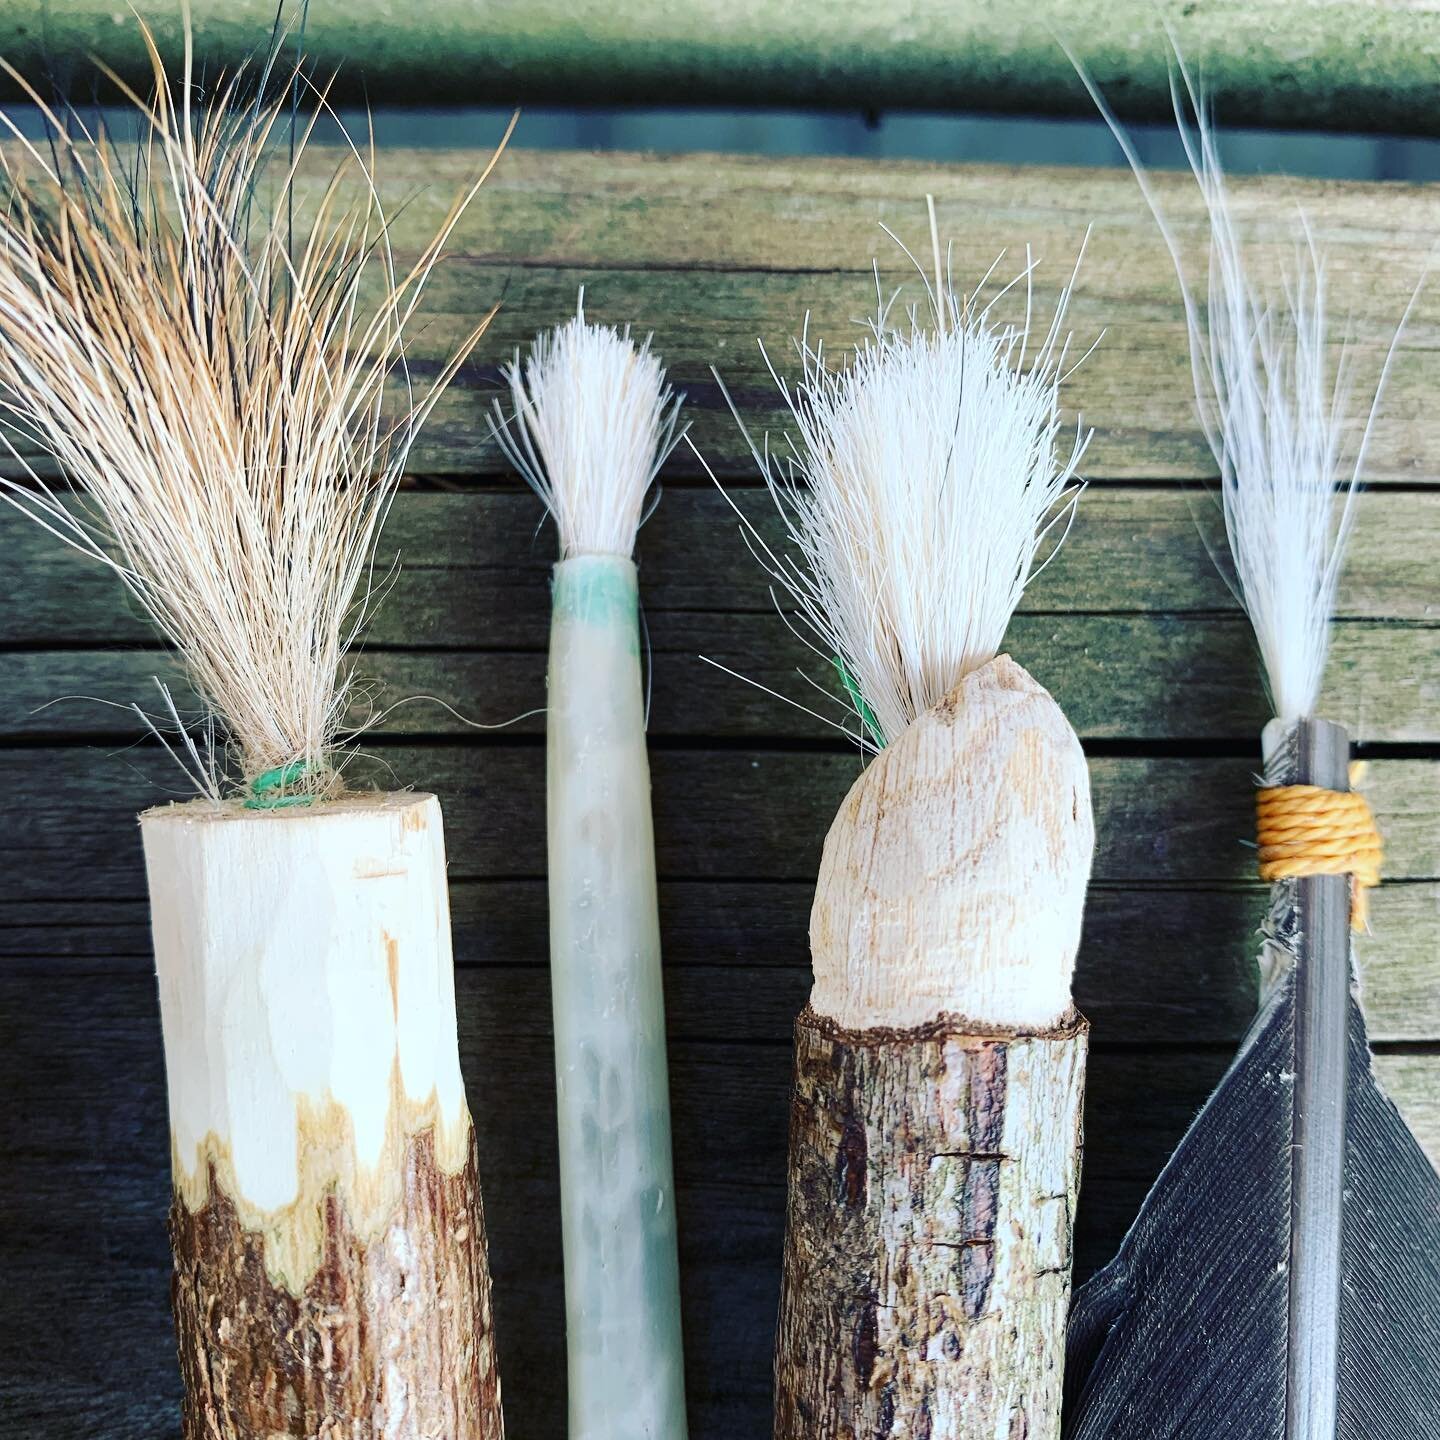 This is just the beginning of making brushes with Nicole Jahraus in the Brushes and Brooms guild through EartHand Gleaner&rsquo;s Society.

Every session there is so much inspiration from Nicole and all the members.
And that&rsquo;s totally Tundra&rs